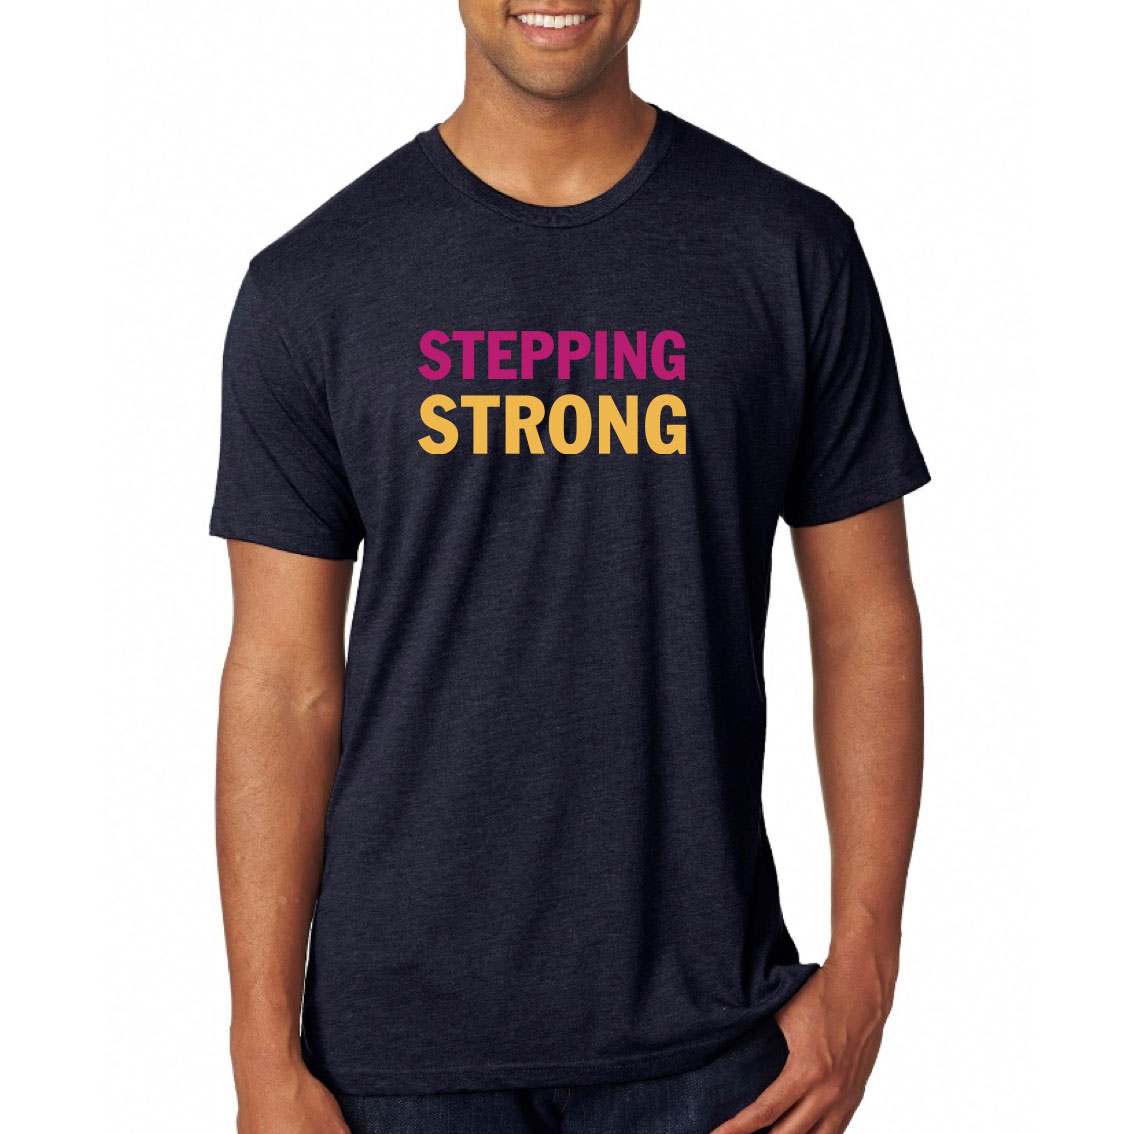 Men’s 2020 Stepping Strong Crew – Stepping Strong